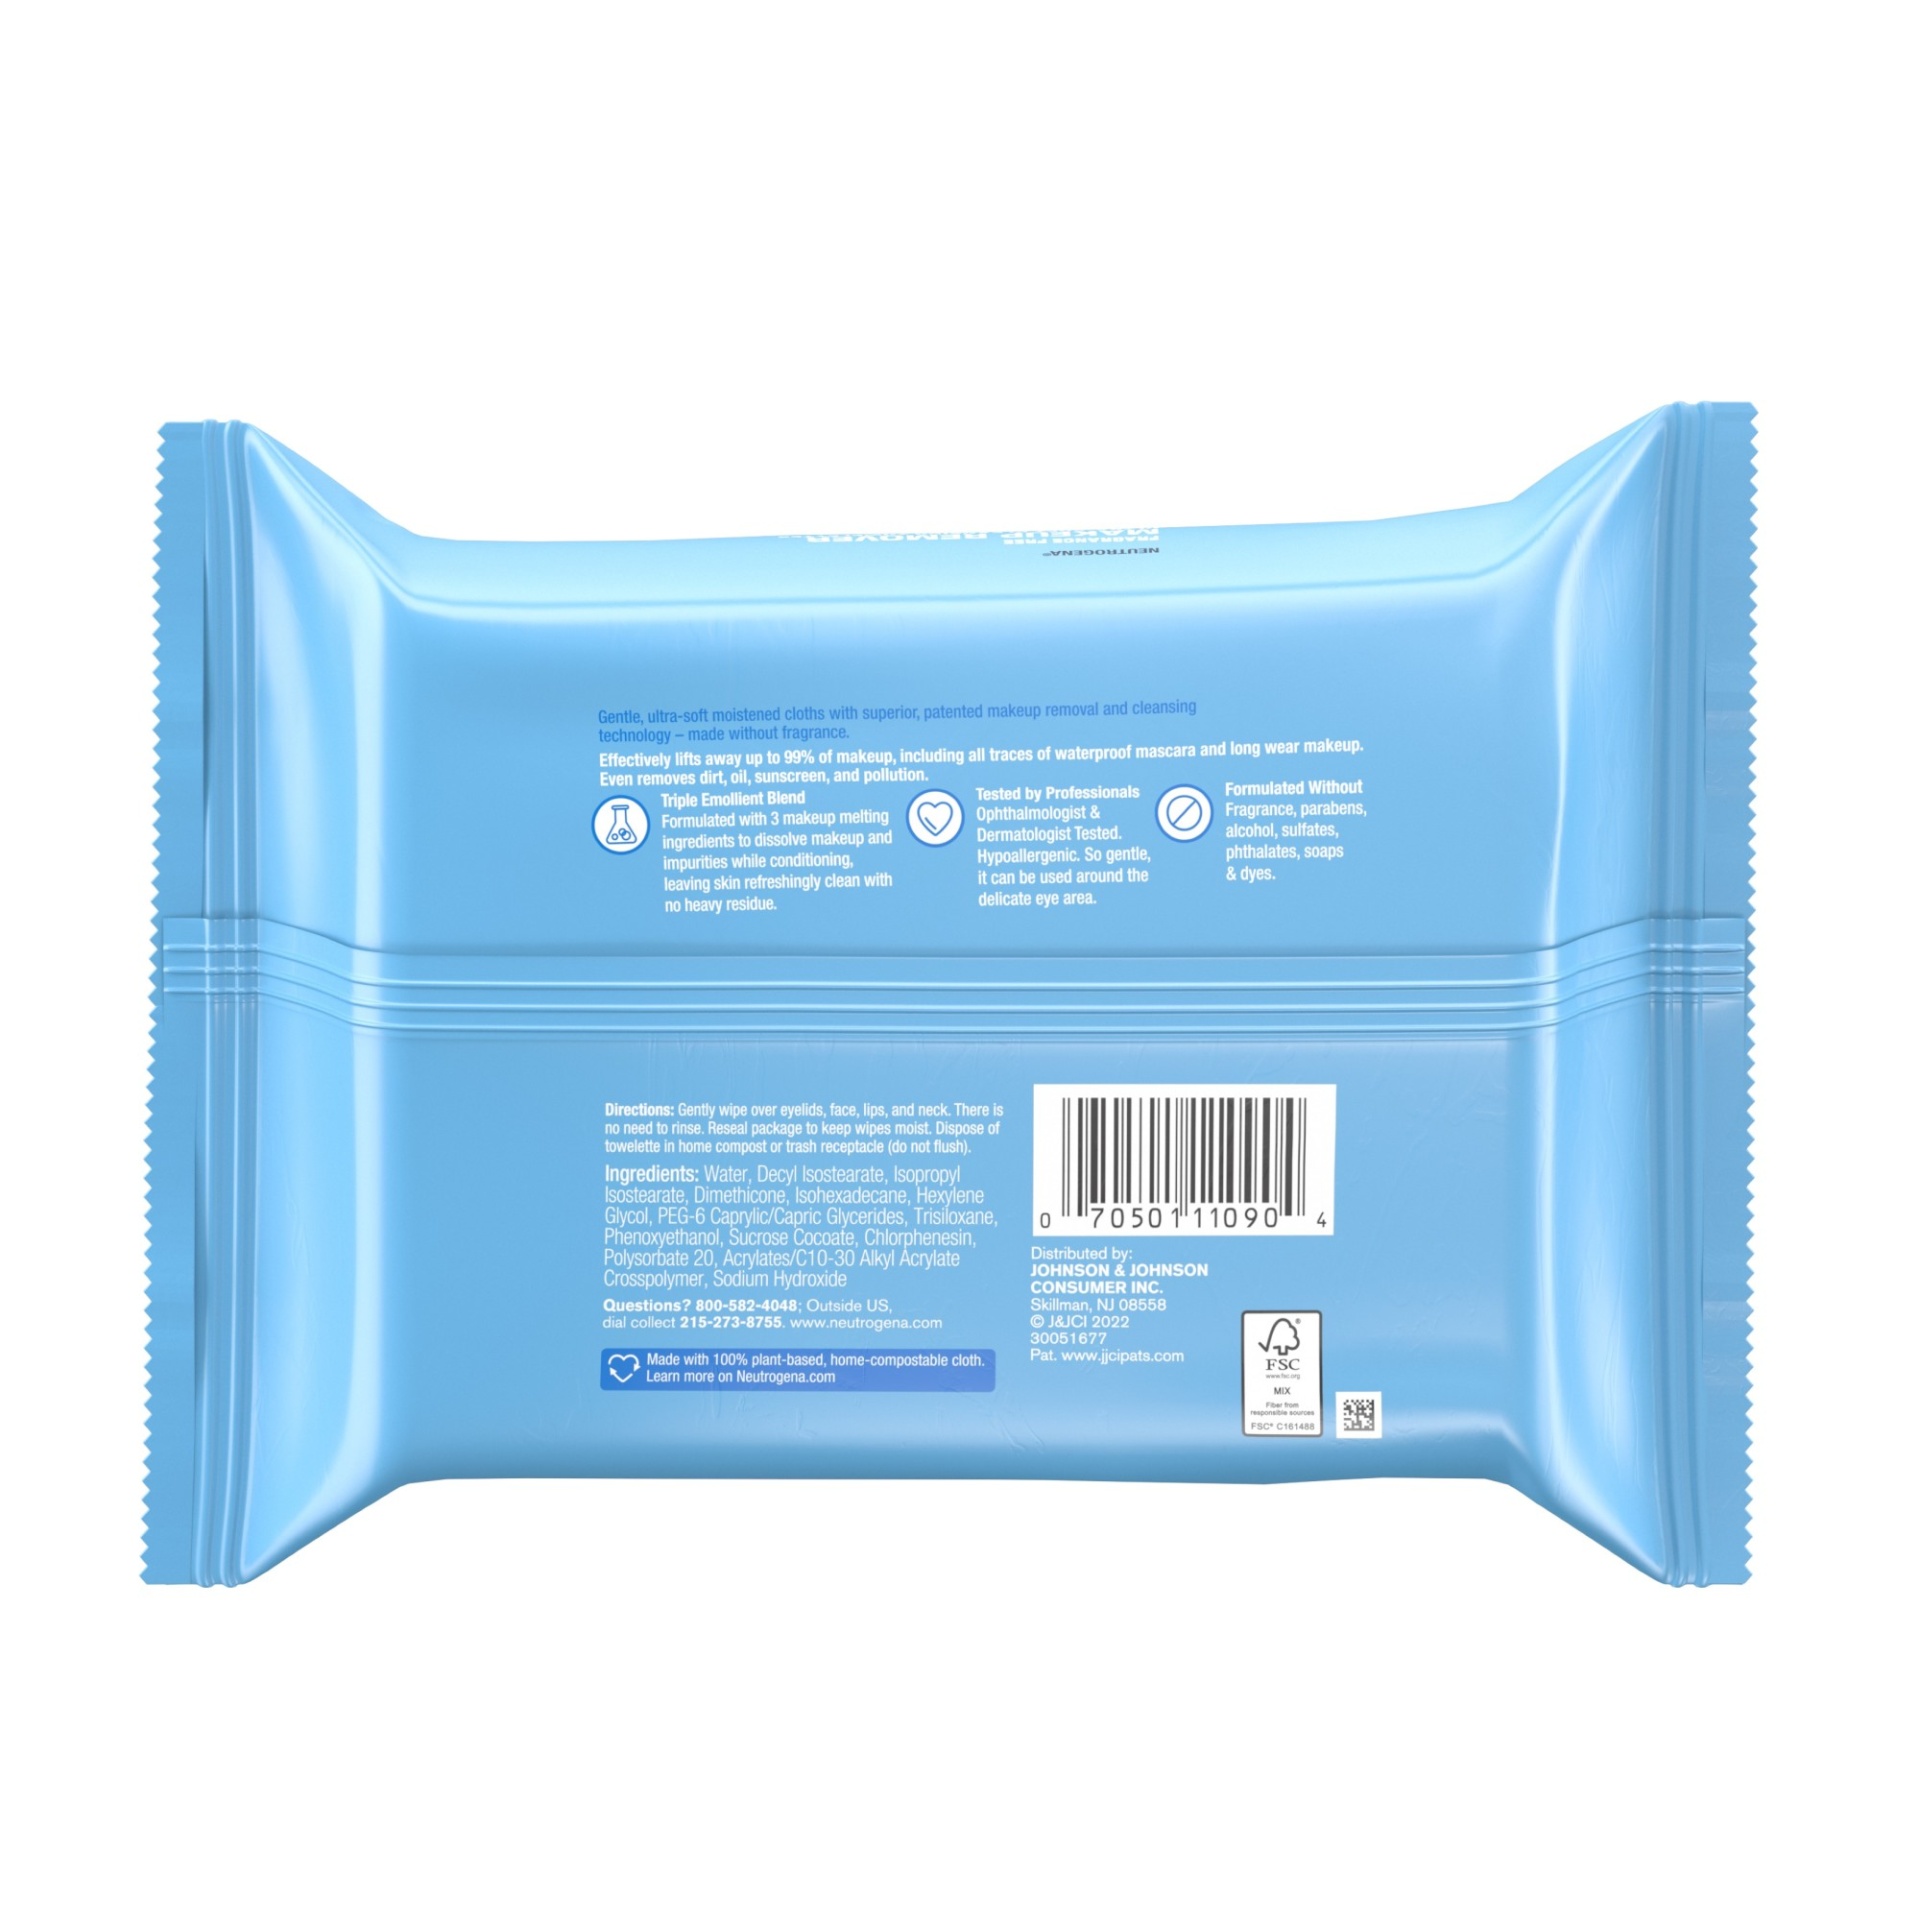 slide 2 of 7, Neutrogena Fragrance-Free Makeup Remover Face Wipes, Daily Facial Cleansing Towelettes for Waterproof Makeup, Dirt & Oil, Gentle, Alcohol- & Fragrance Free, 100% Plant-Based Fibers, 25 ct